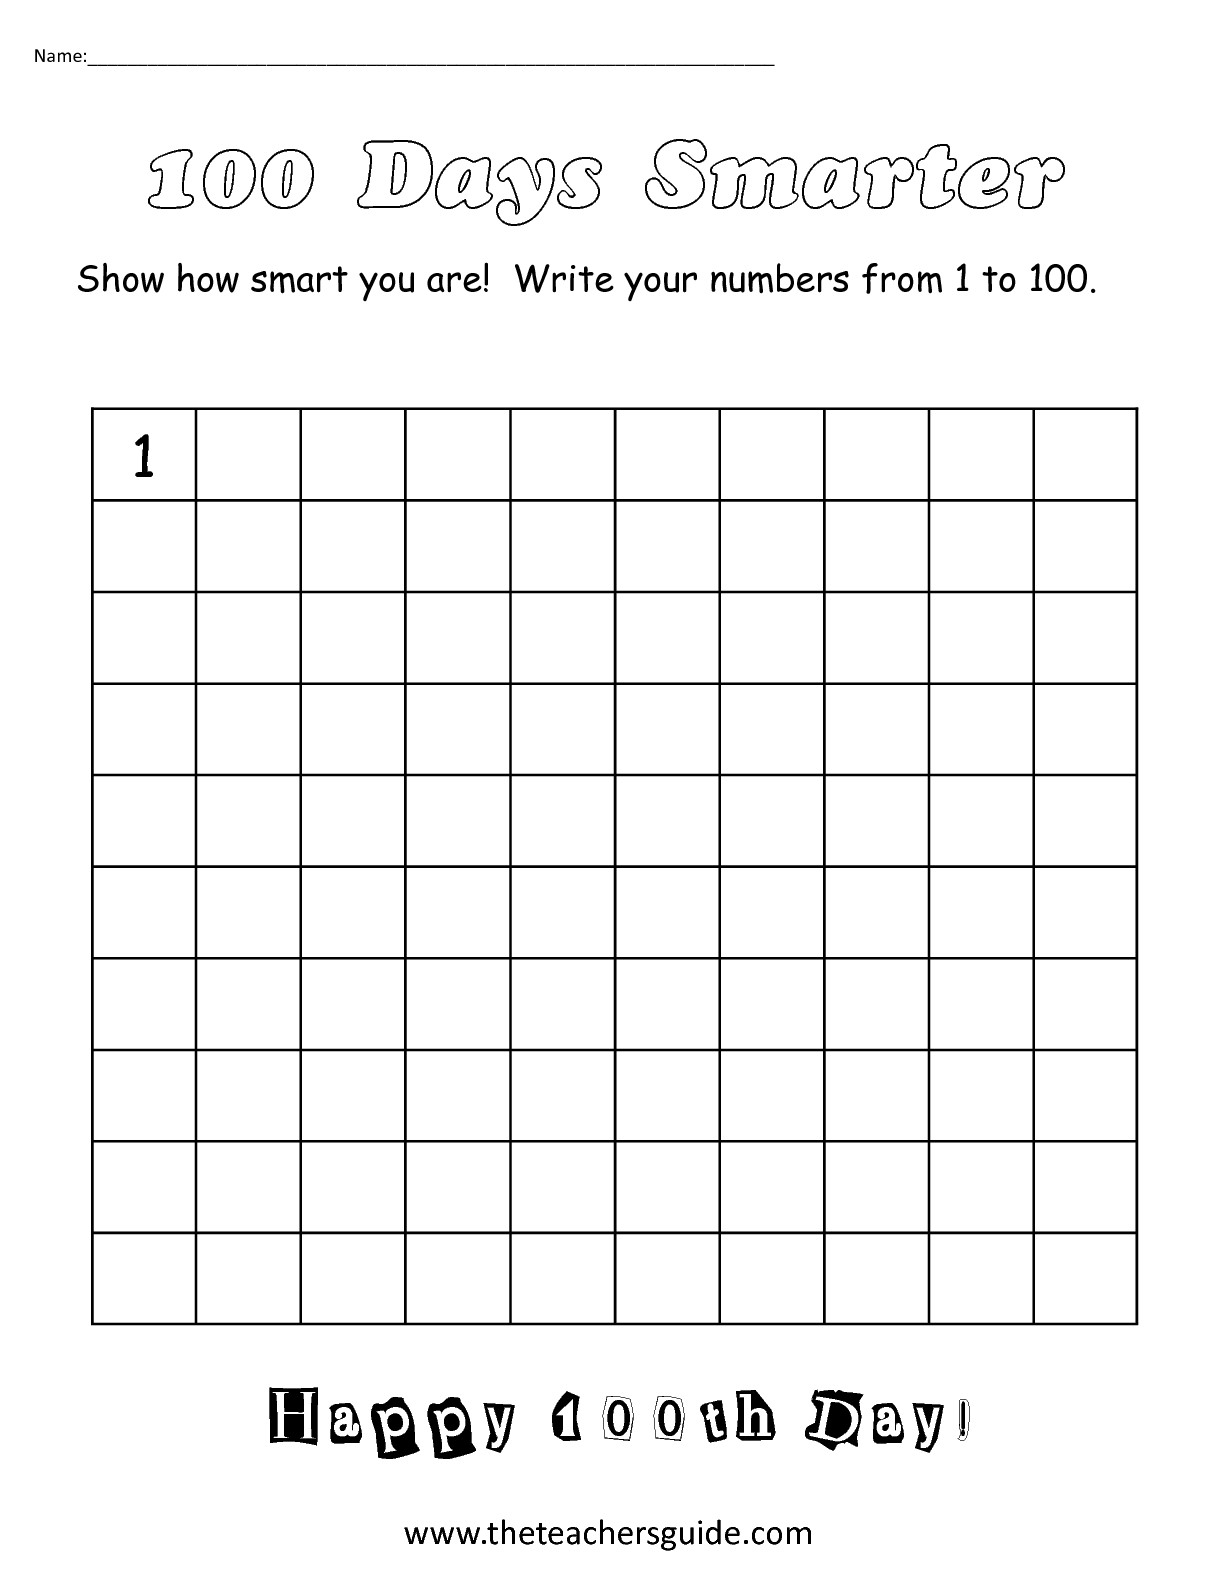 writing-numbers-1-to-100-printable-worksheet-images-and-photos-finder